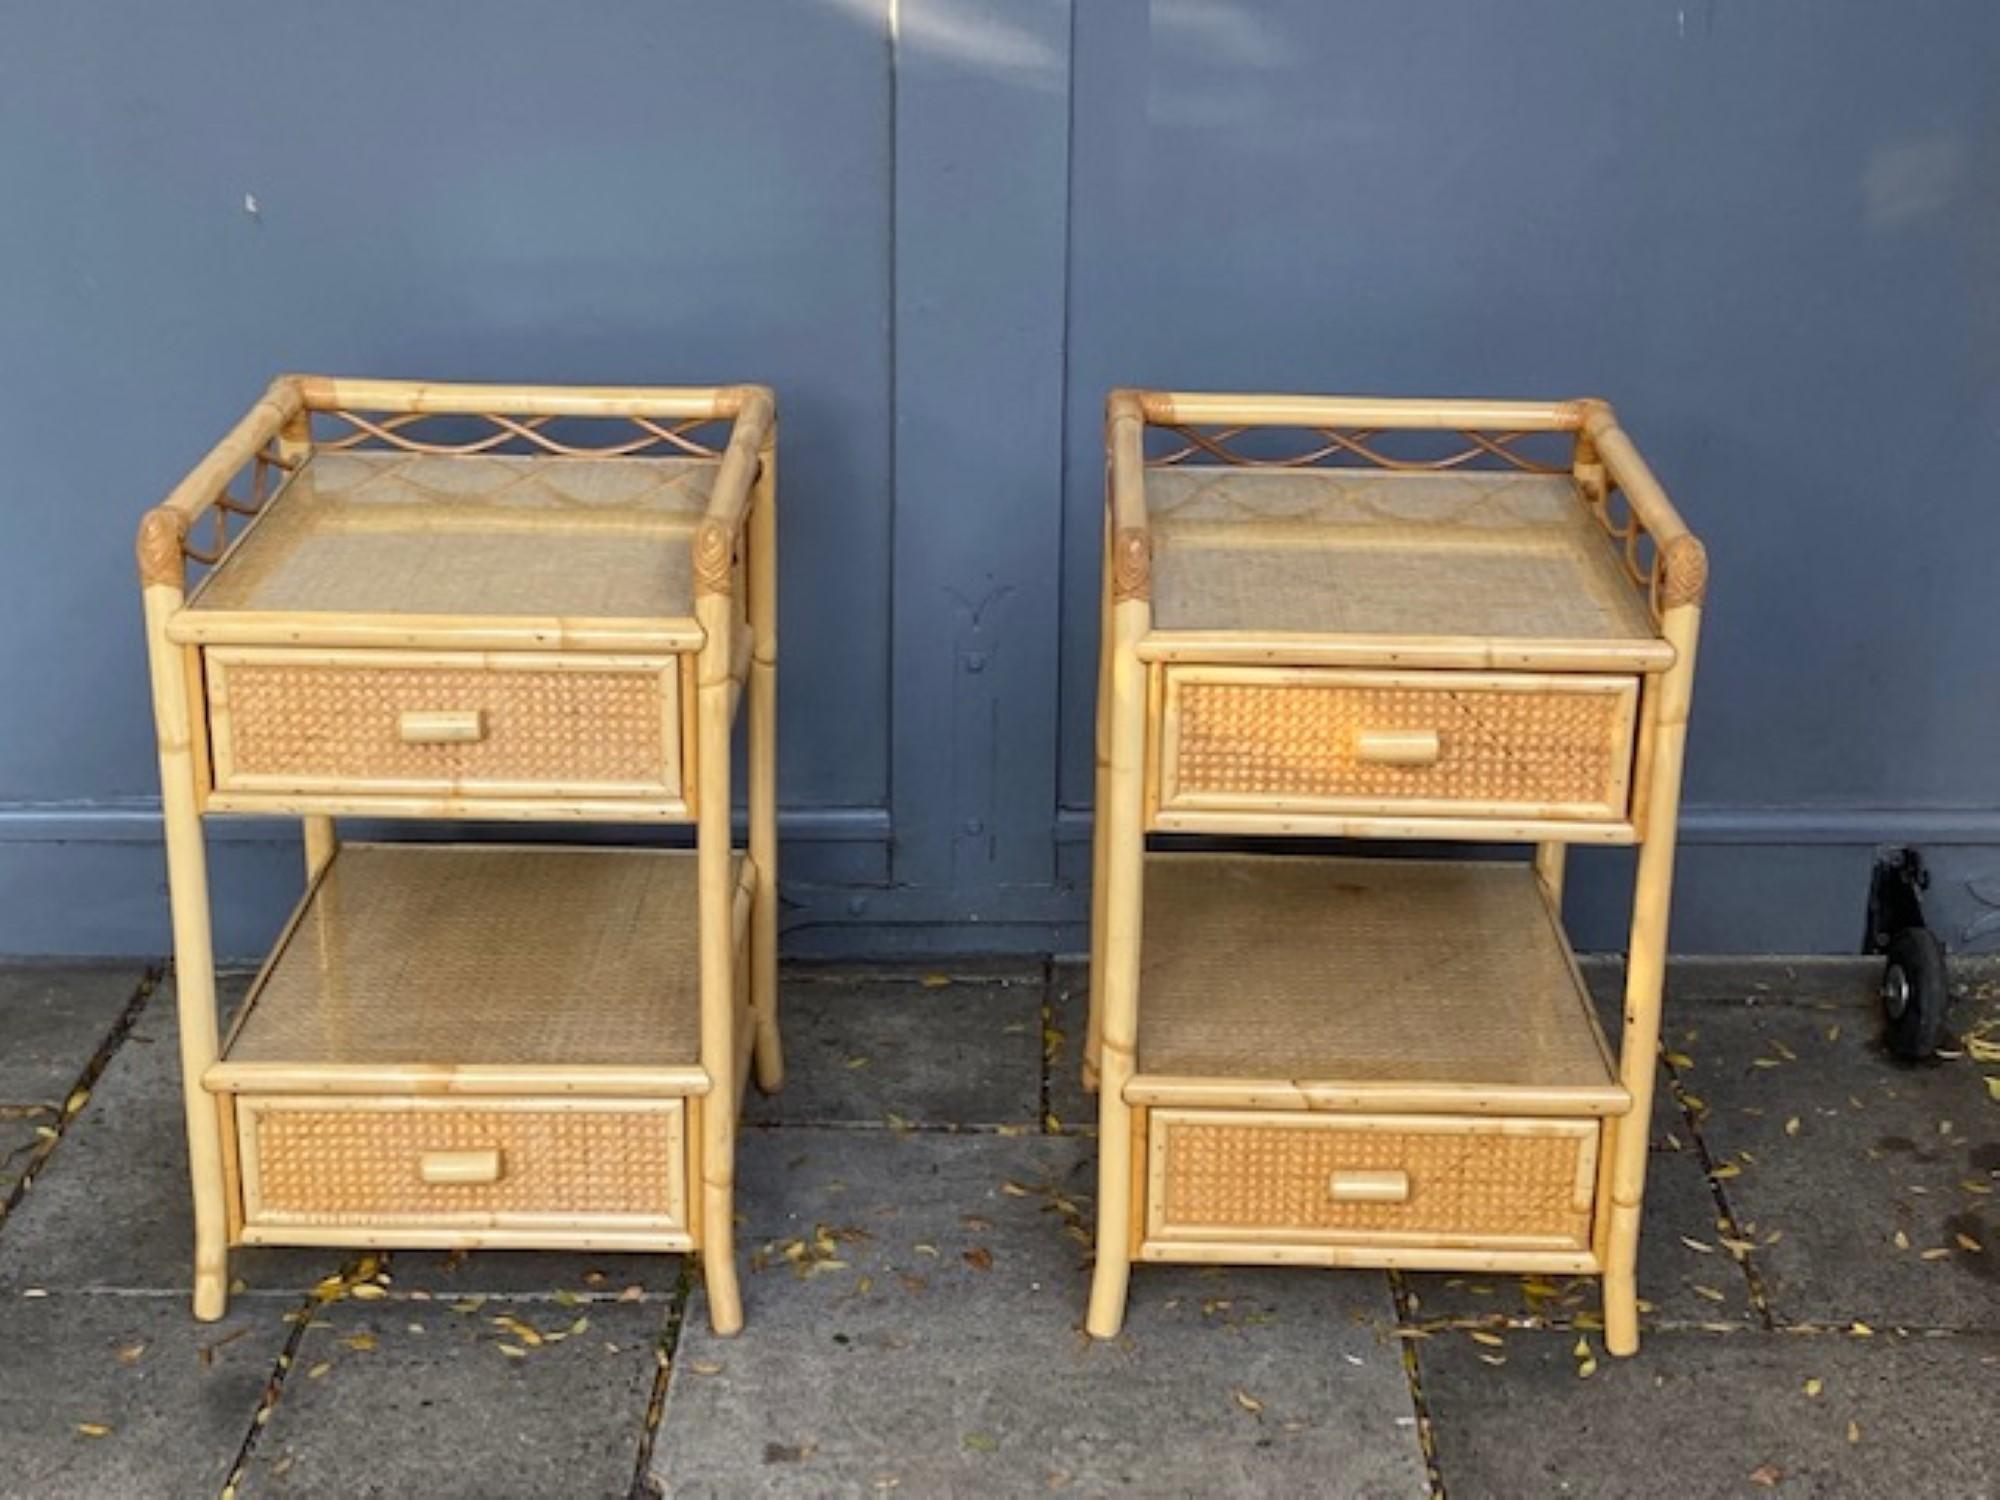 Pair of MCM Rattan / Cane Nightstands / Bedside Tables, Angraves, English, 1970s For Sale 5